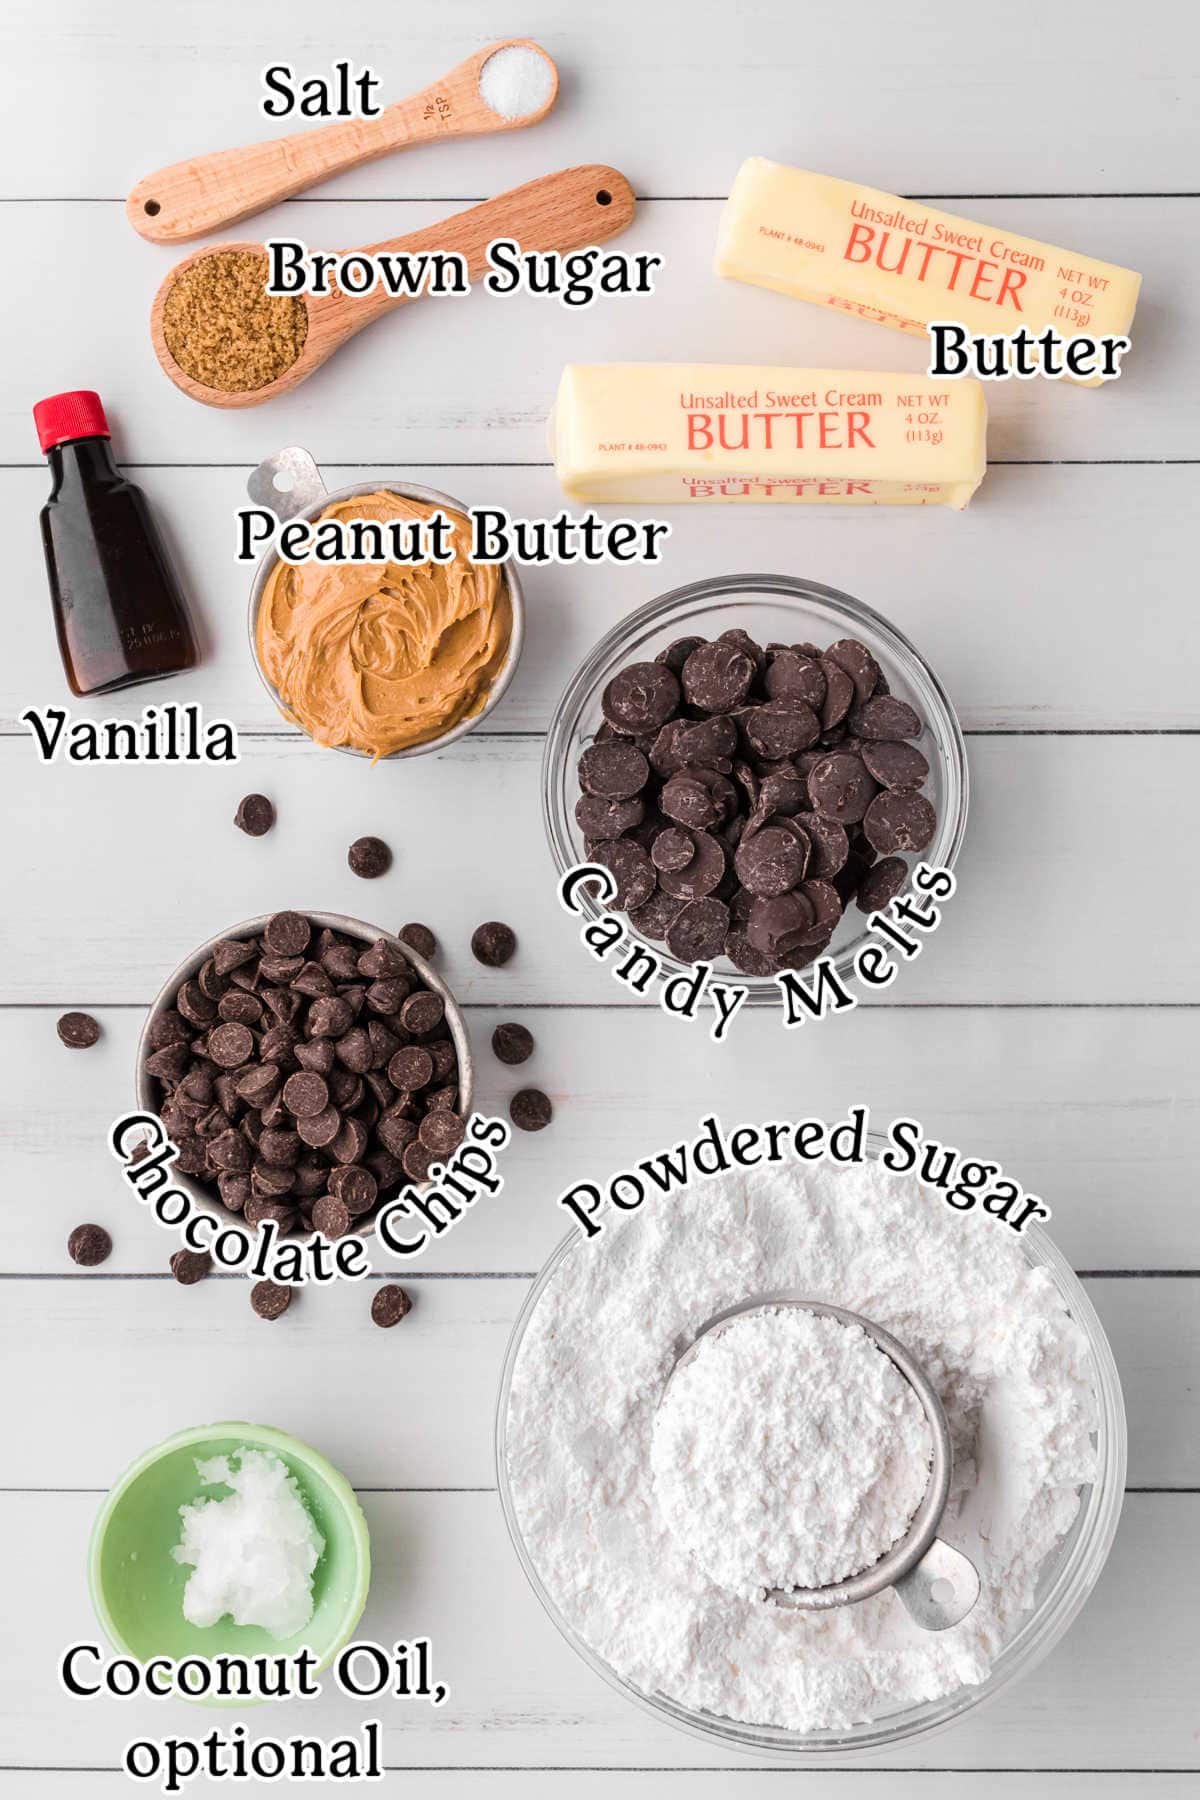 An overhead photo with text overlay of the main ingredients, including peanut butter, sugar, chocolate, and butter.